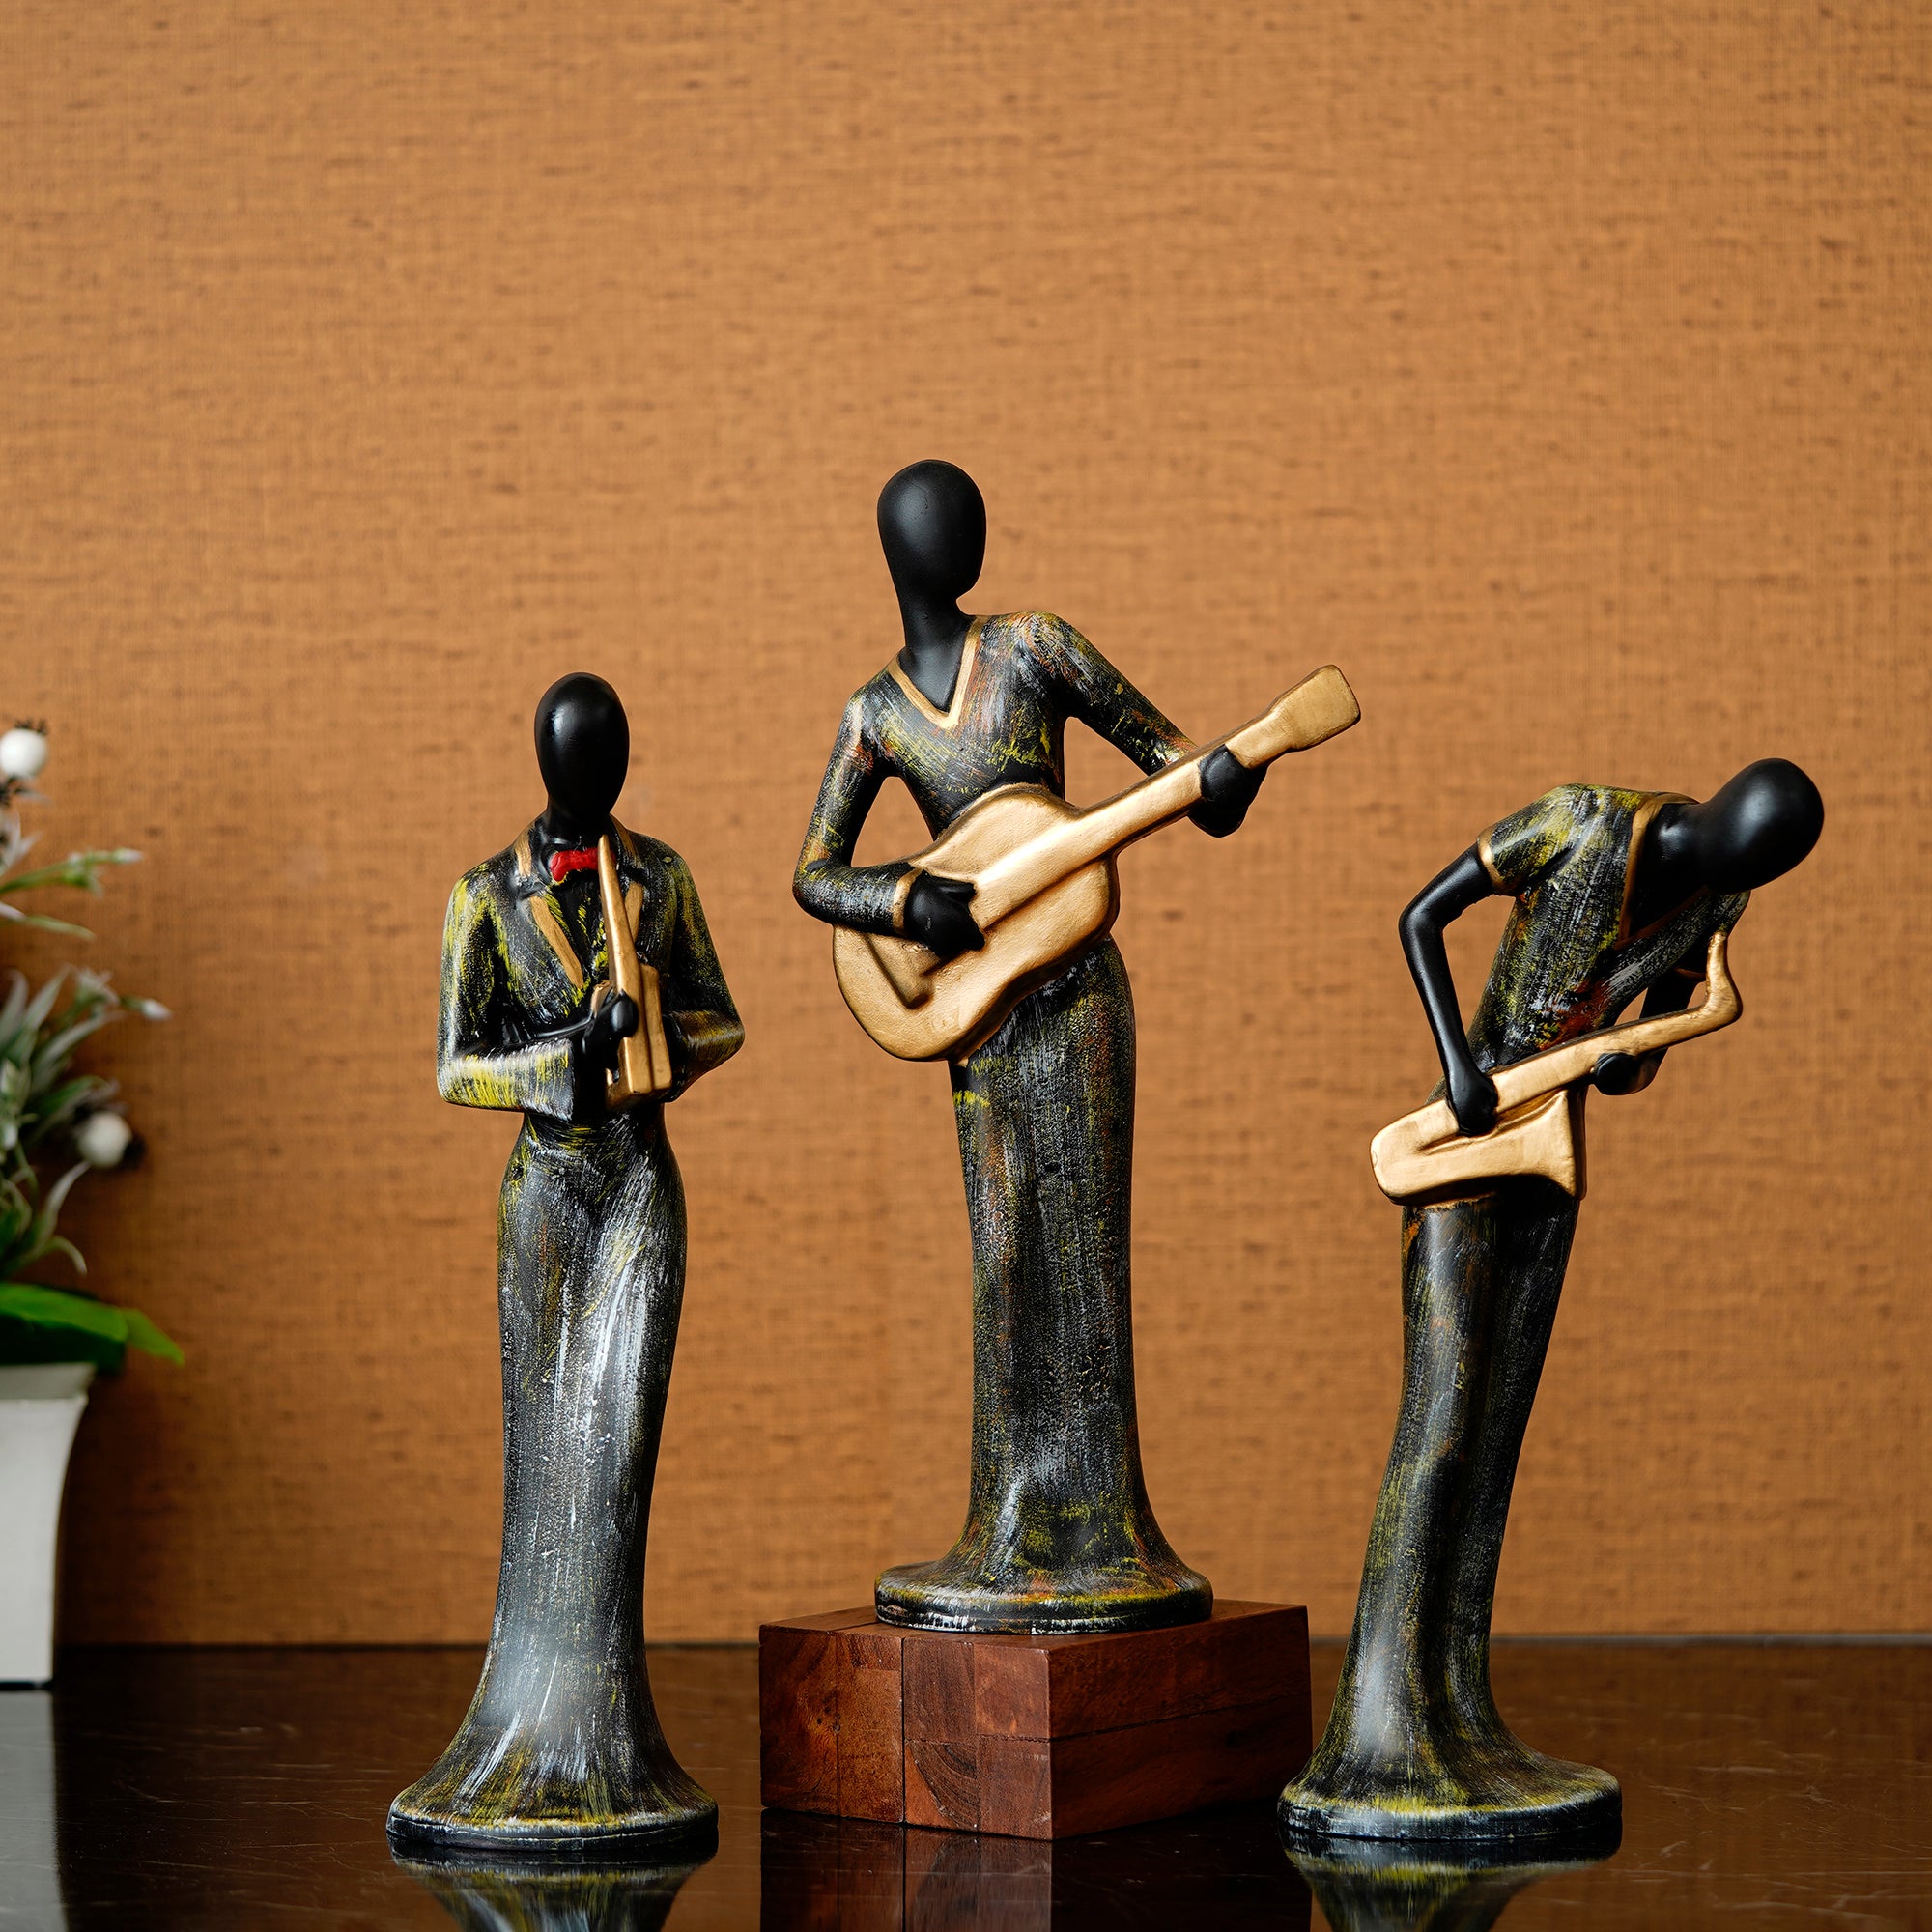 Grey and Black Polyresin Set of 3 Ladies figurines Playing Wind, Guitar,Saxophone Musical Instrument Handcrafted Decorative Showpiece